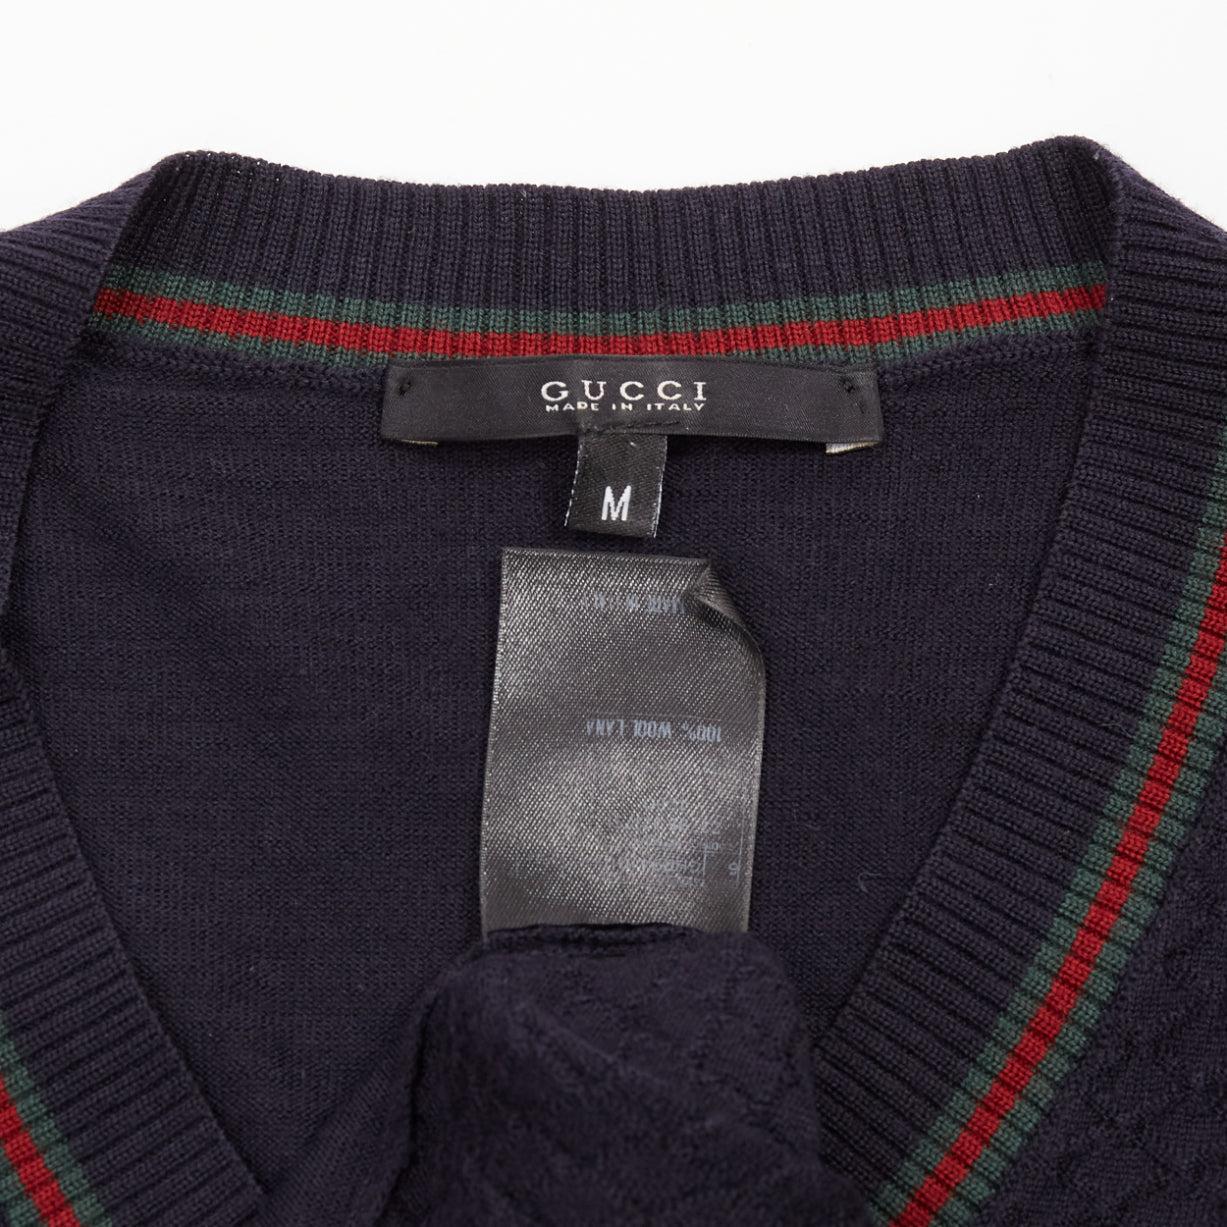 GUCCI navy 100% wool green red web v neck long sleeve sweater M For Sale 4